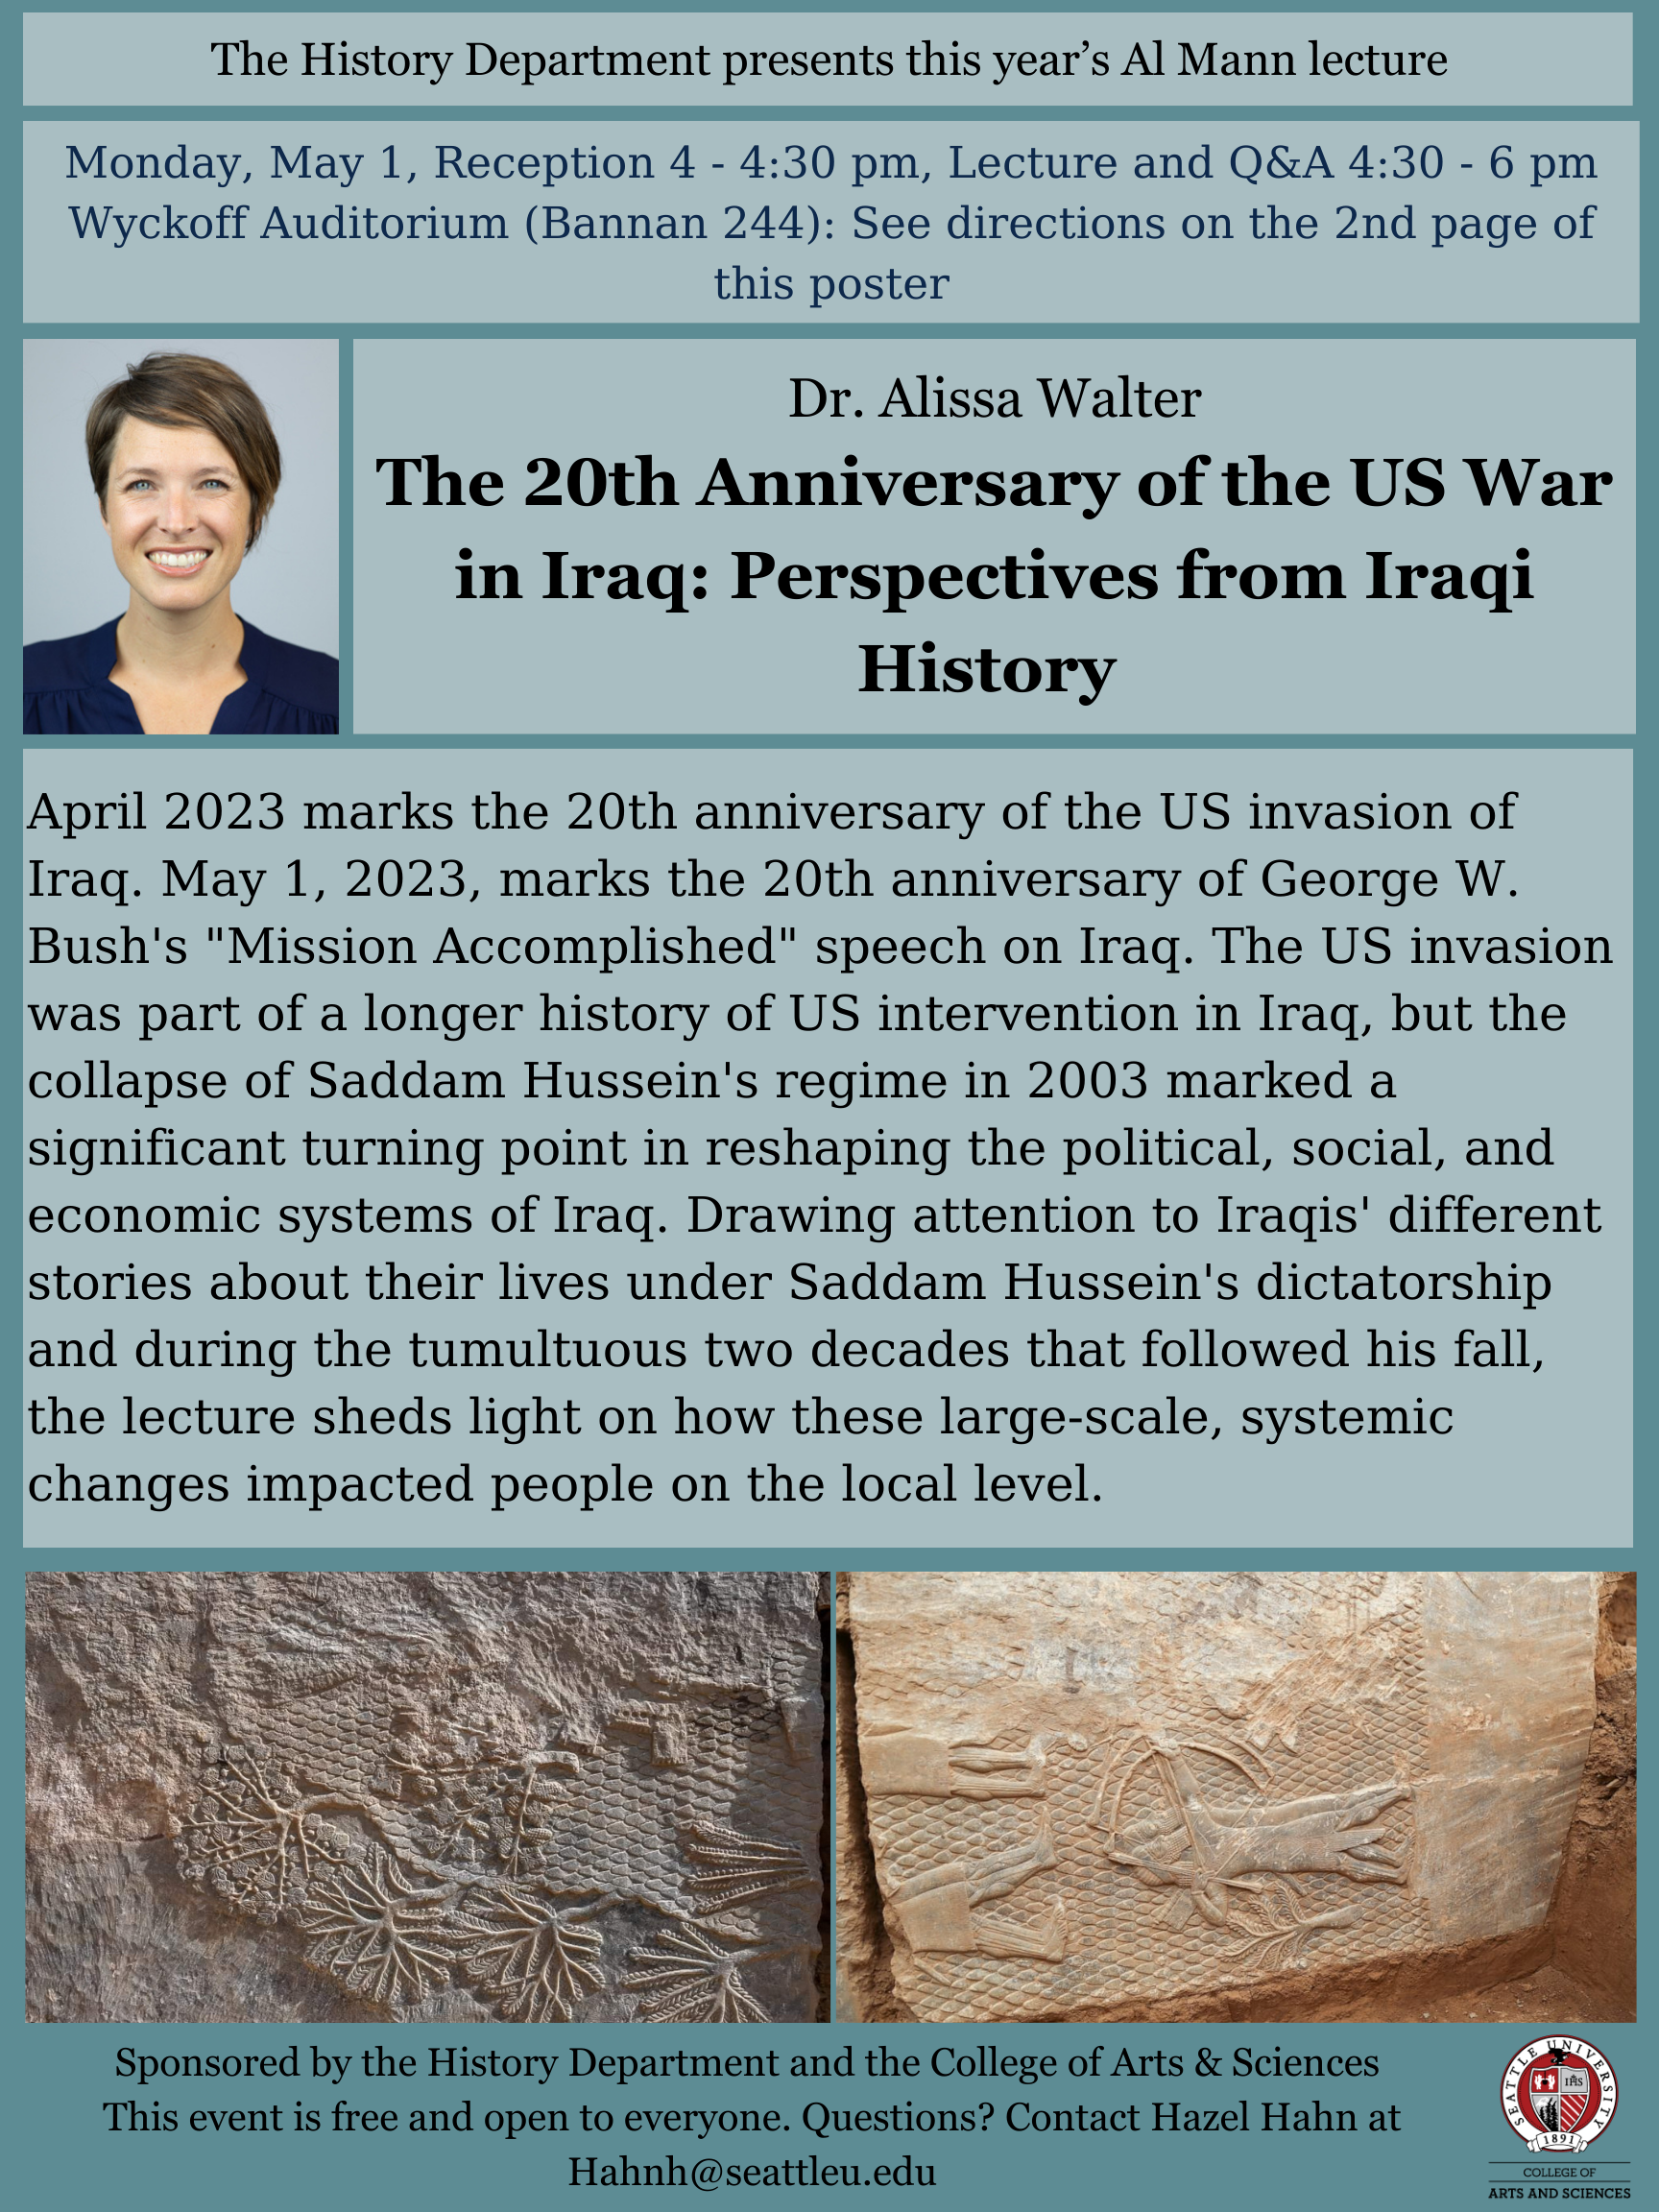 This year's 2023 Al Mahn Lecture features Dr. Alissa Walter, who will discuss The 20th Anniversary of the US War in Iraq: Perspectives from Iraqi History. The lecture is on Monday May 1st, from 4:30-6:30pm in the Wyckoff Auditorium